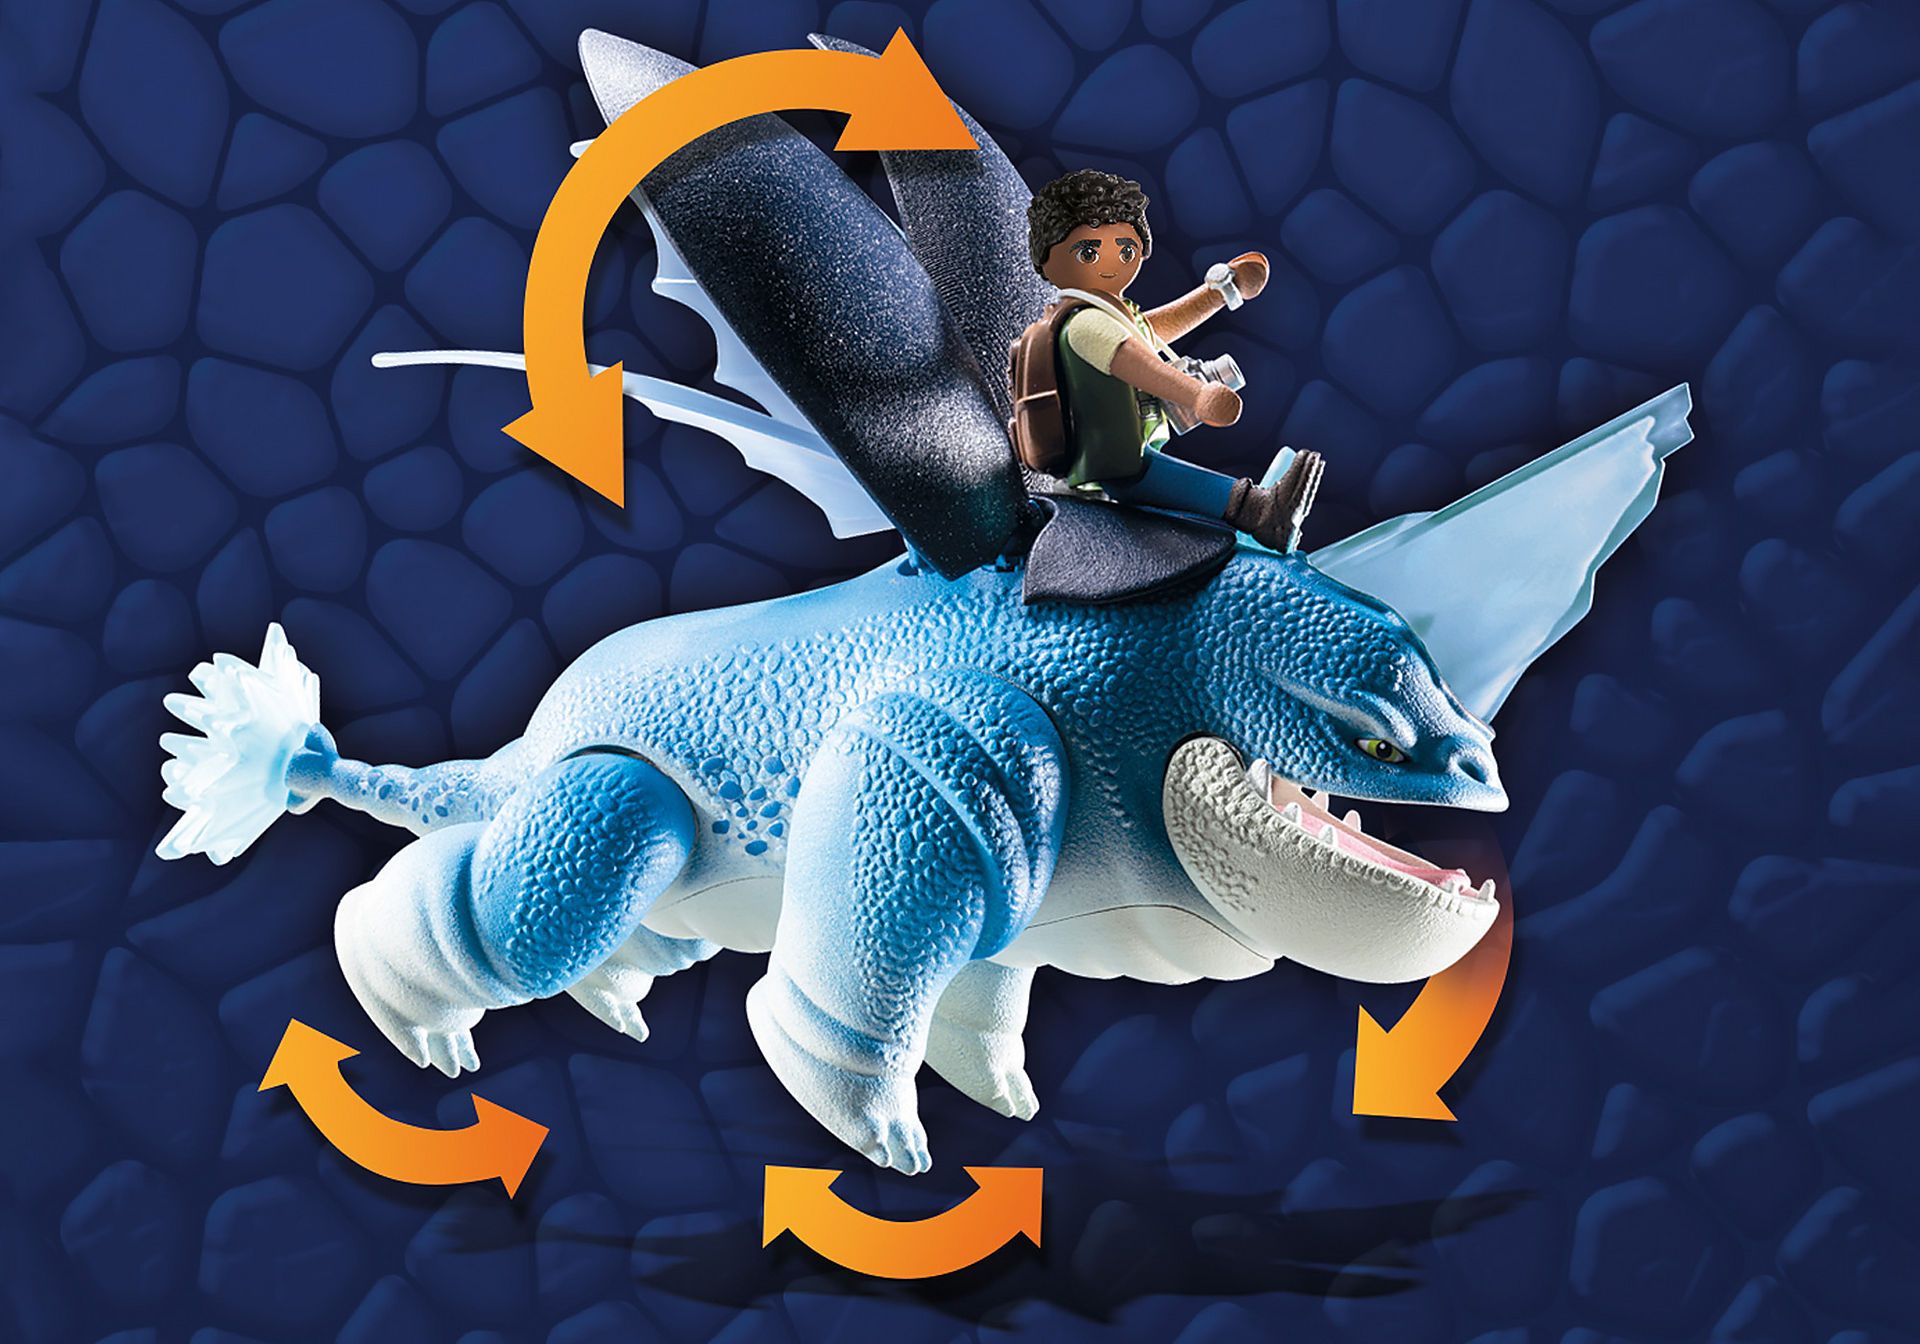 Playmobil Dragons: The Nine Realms Plowhorn & D'Ange